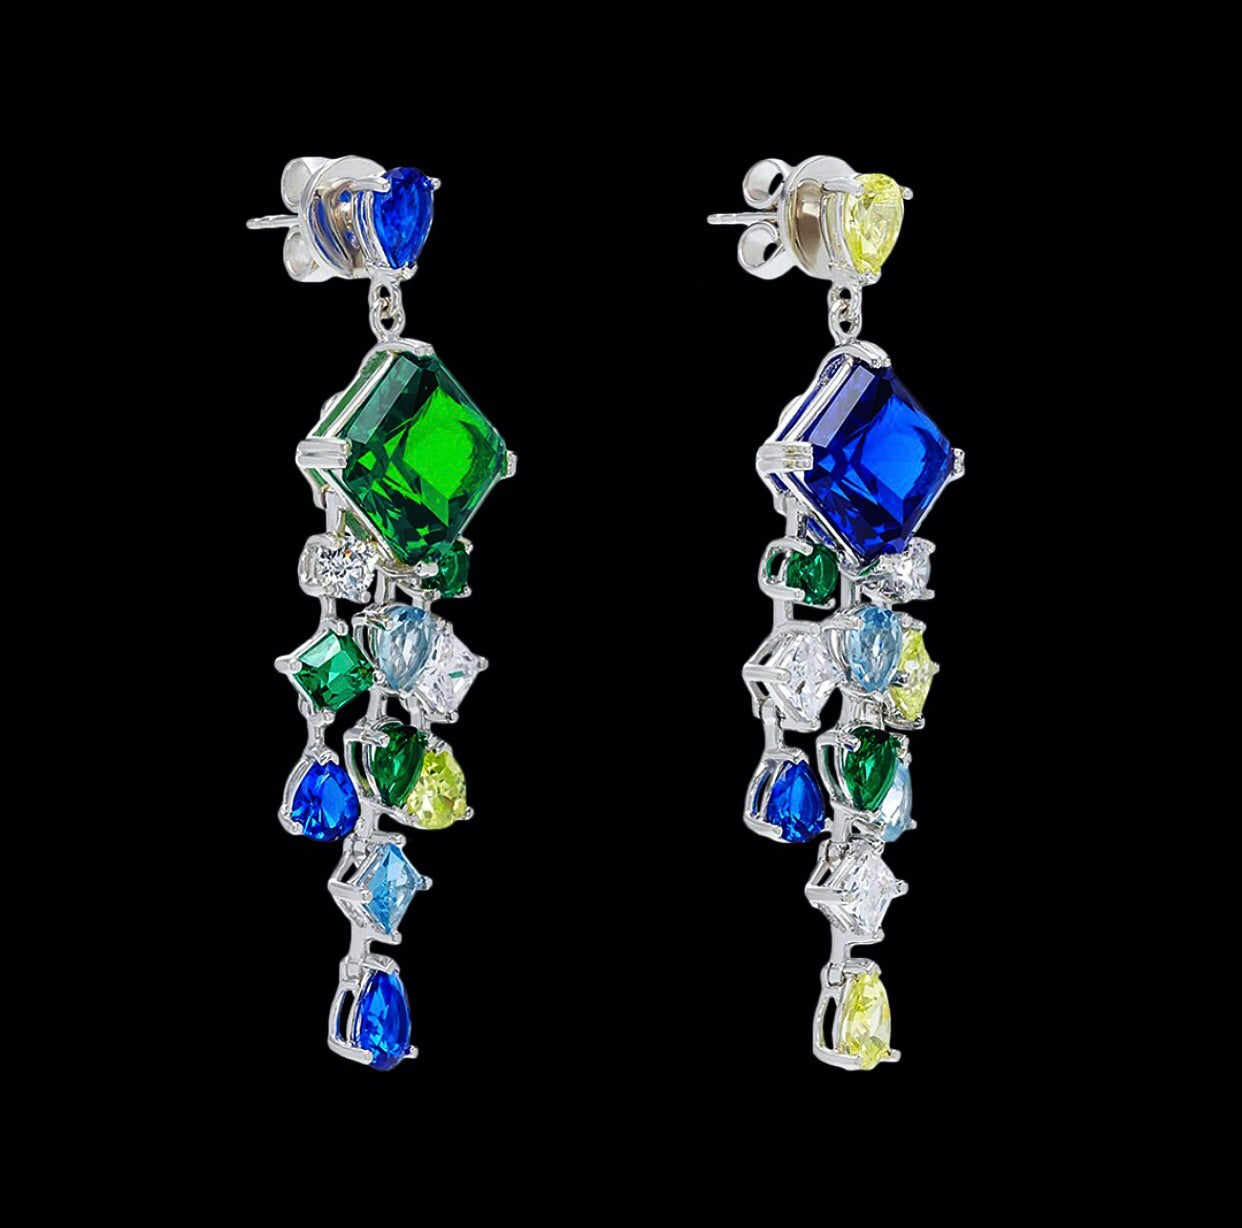 Emerald Asscher Drop Earrings, Earring, Anabela Chan Joaillerie - Fine jewelry with laboratory grown and created gemstones hand-crafted in the United Kingdom. Anabela Chan Joaillerie is the first fine jewellery brand in the world to champion laboratory-grown and created gemstones with high jewellery design, artisanal craftsmanship and a focus on ethical and sustainable innovations.